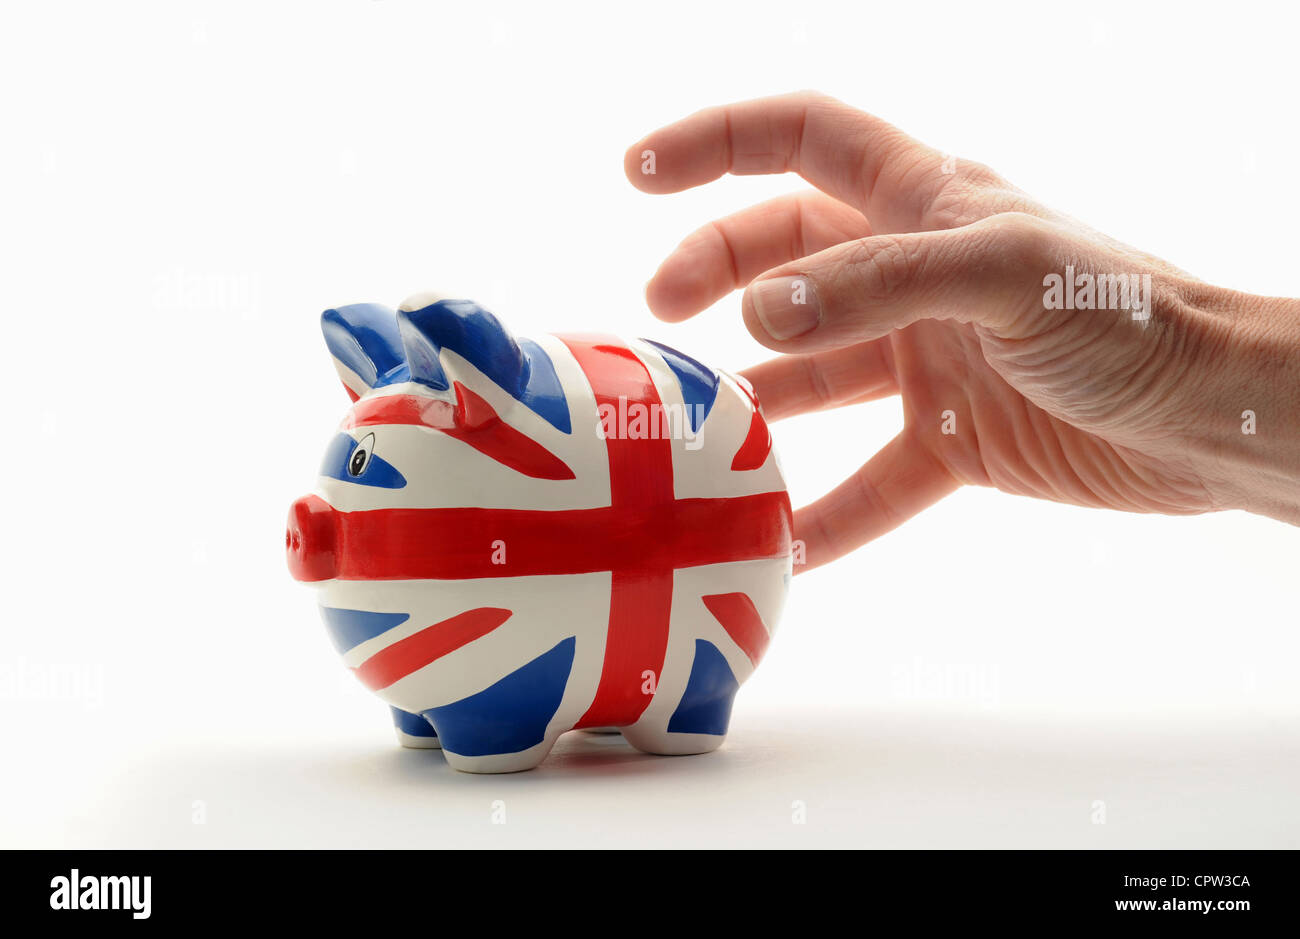 BRITISH PIGGYBANK PIGGY BANK BEING GRABBED BY MANS HAND RE THE ECONOMY SAVINGS INCOMES WAGES HOUSEHOLD BILLS BANKS BANKING UK Stock Photo